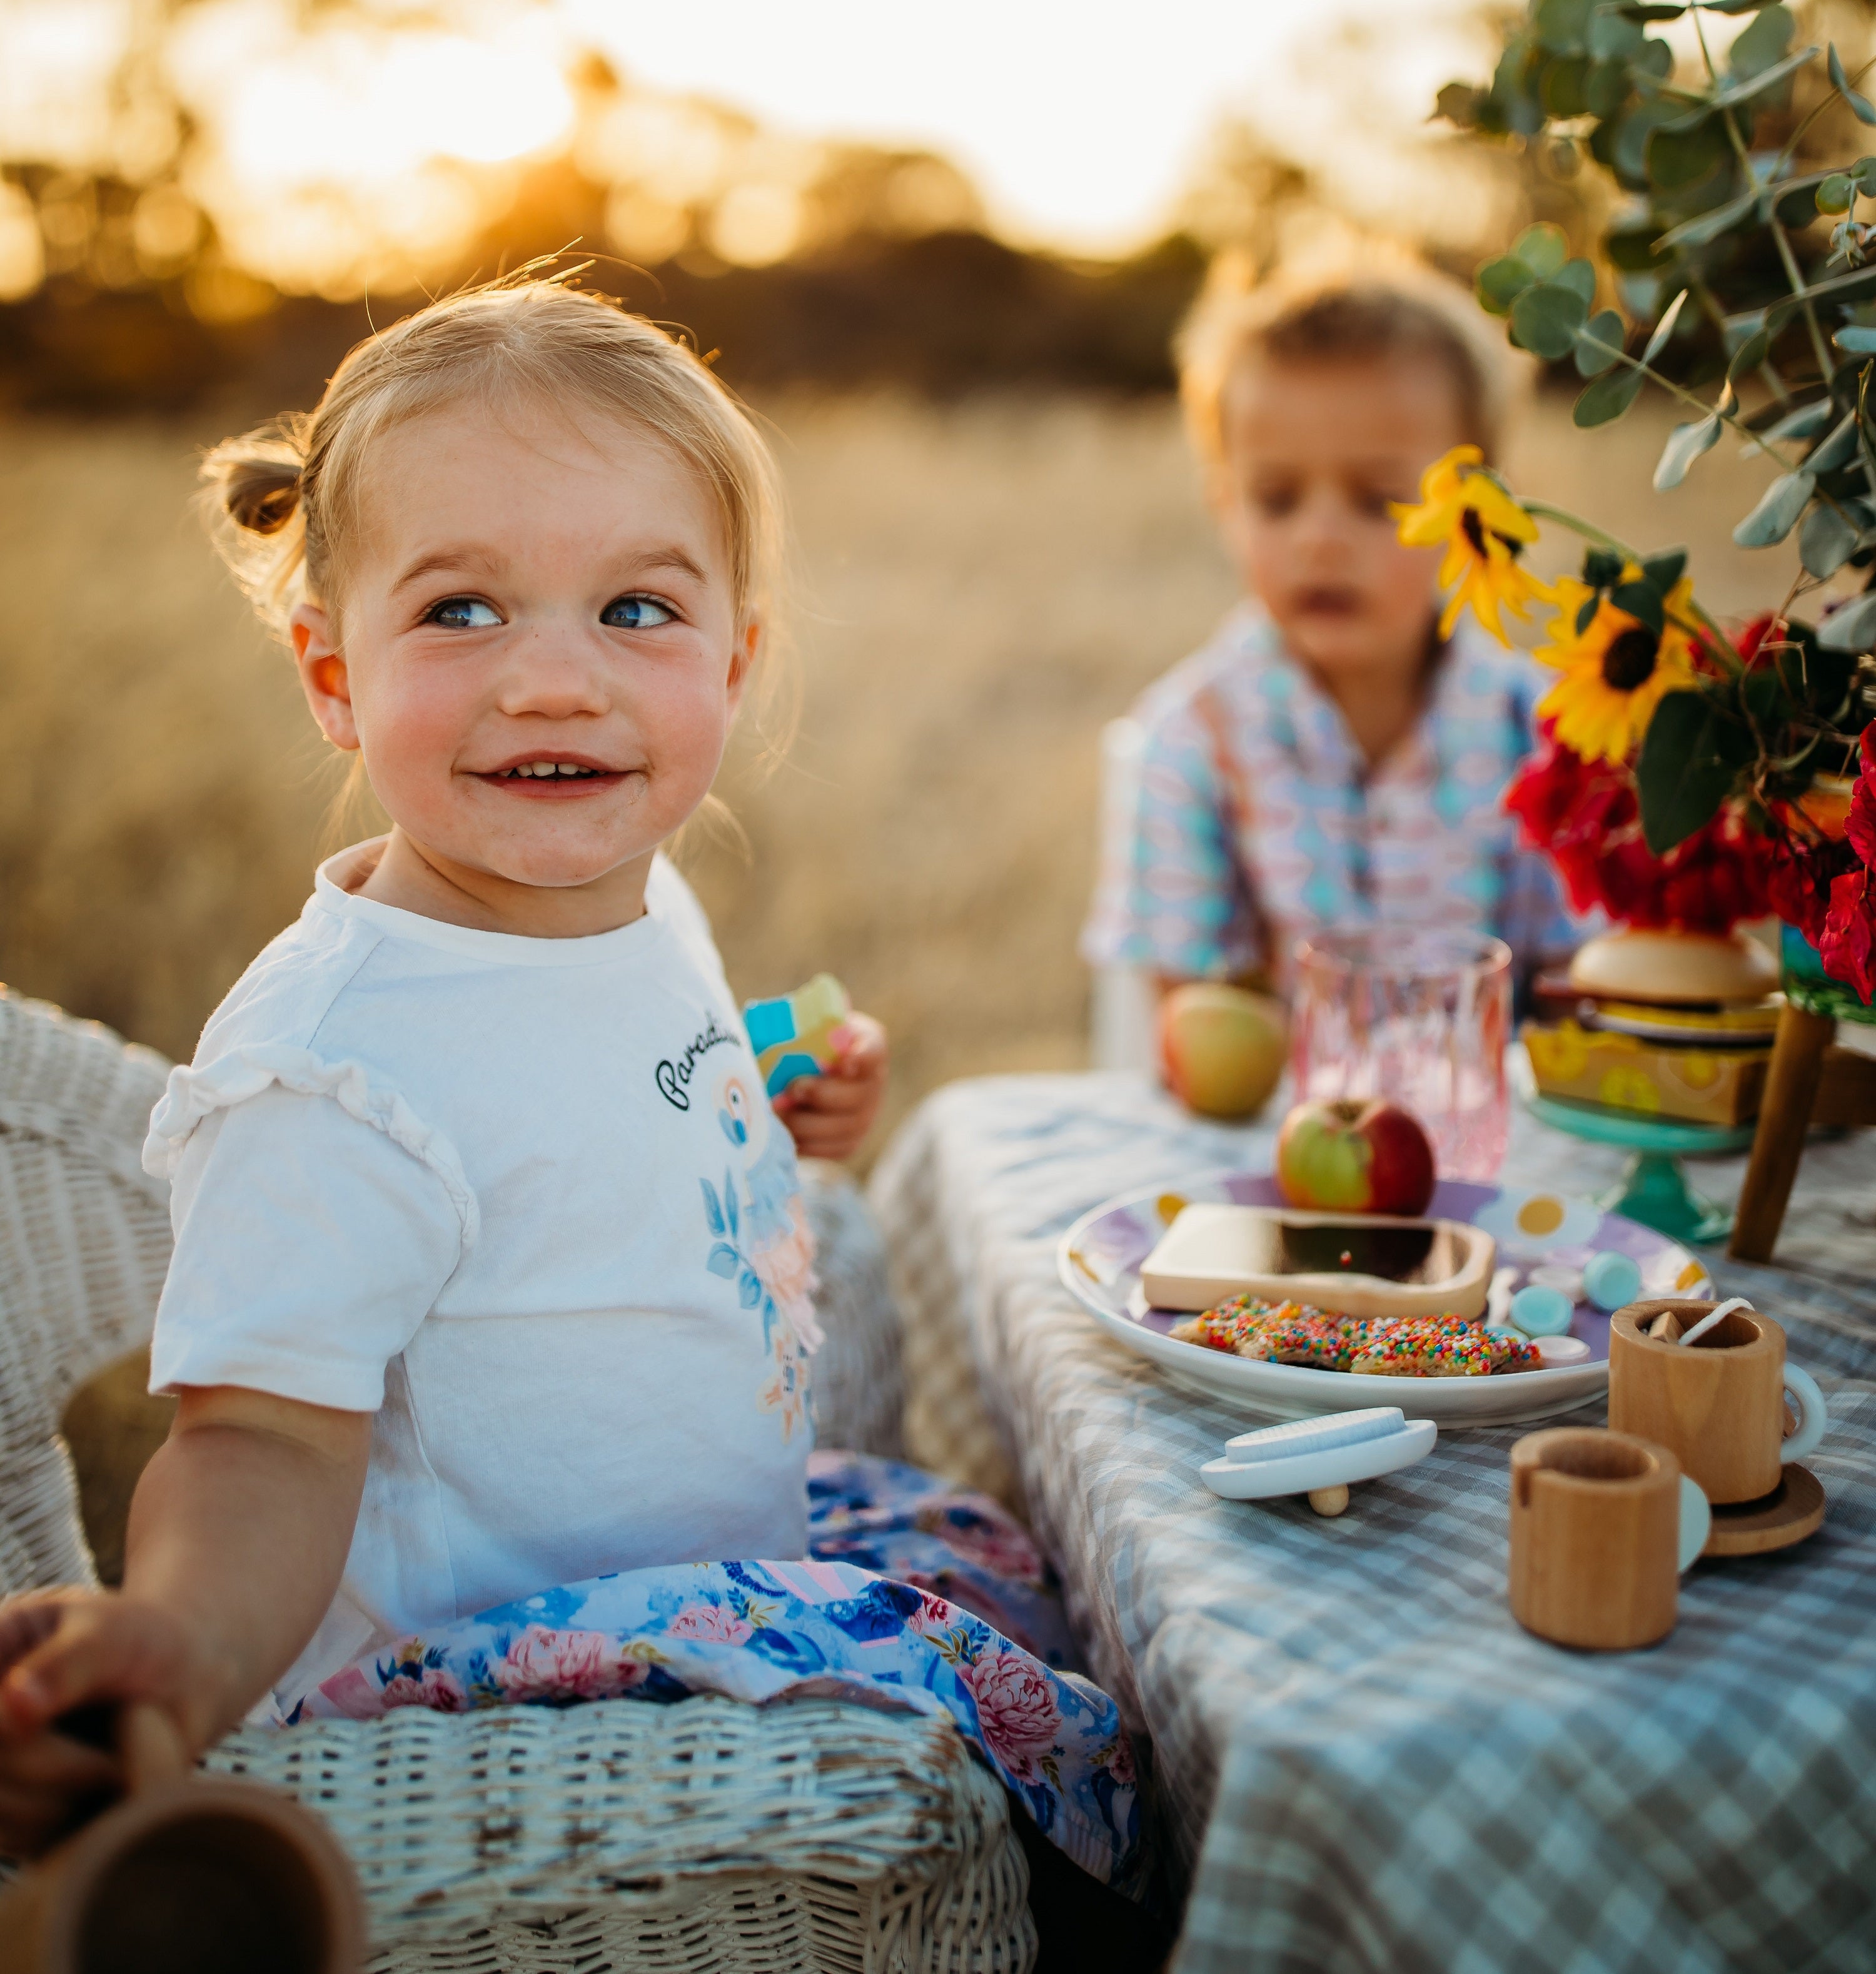 Sunset ☀️ Tea Parties for Play outdoors!